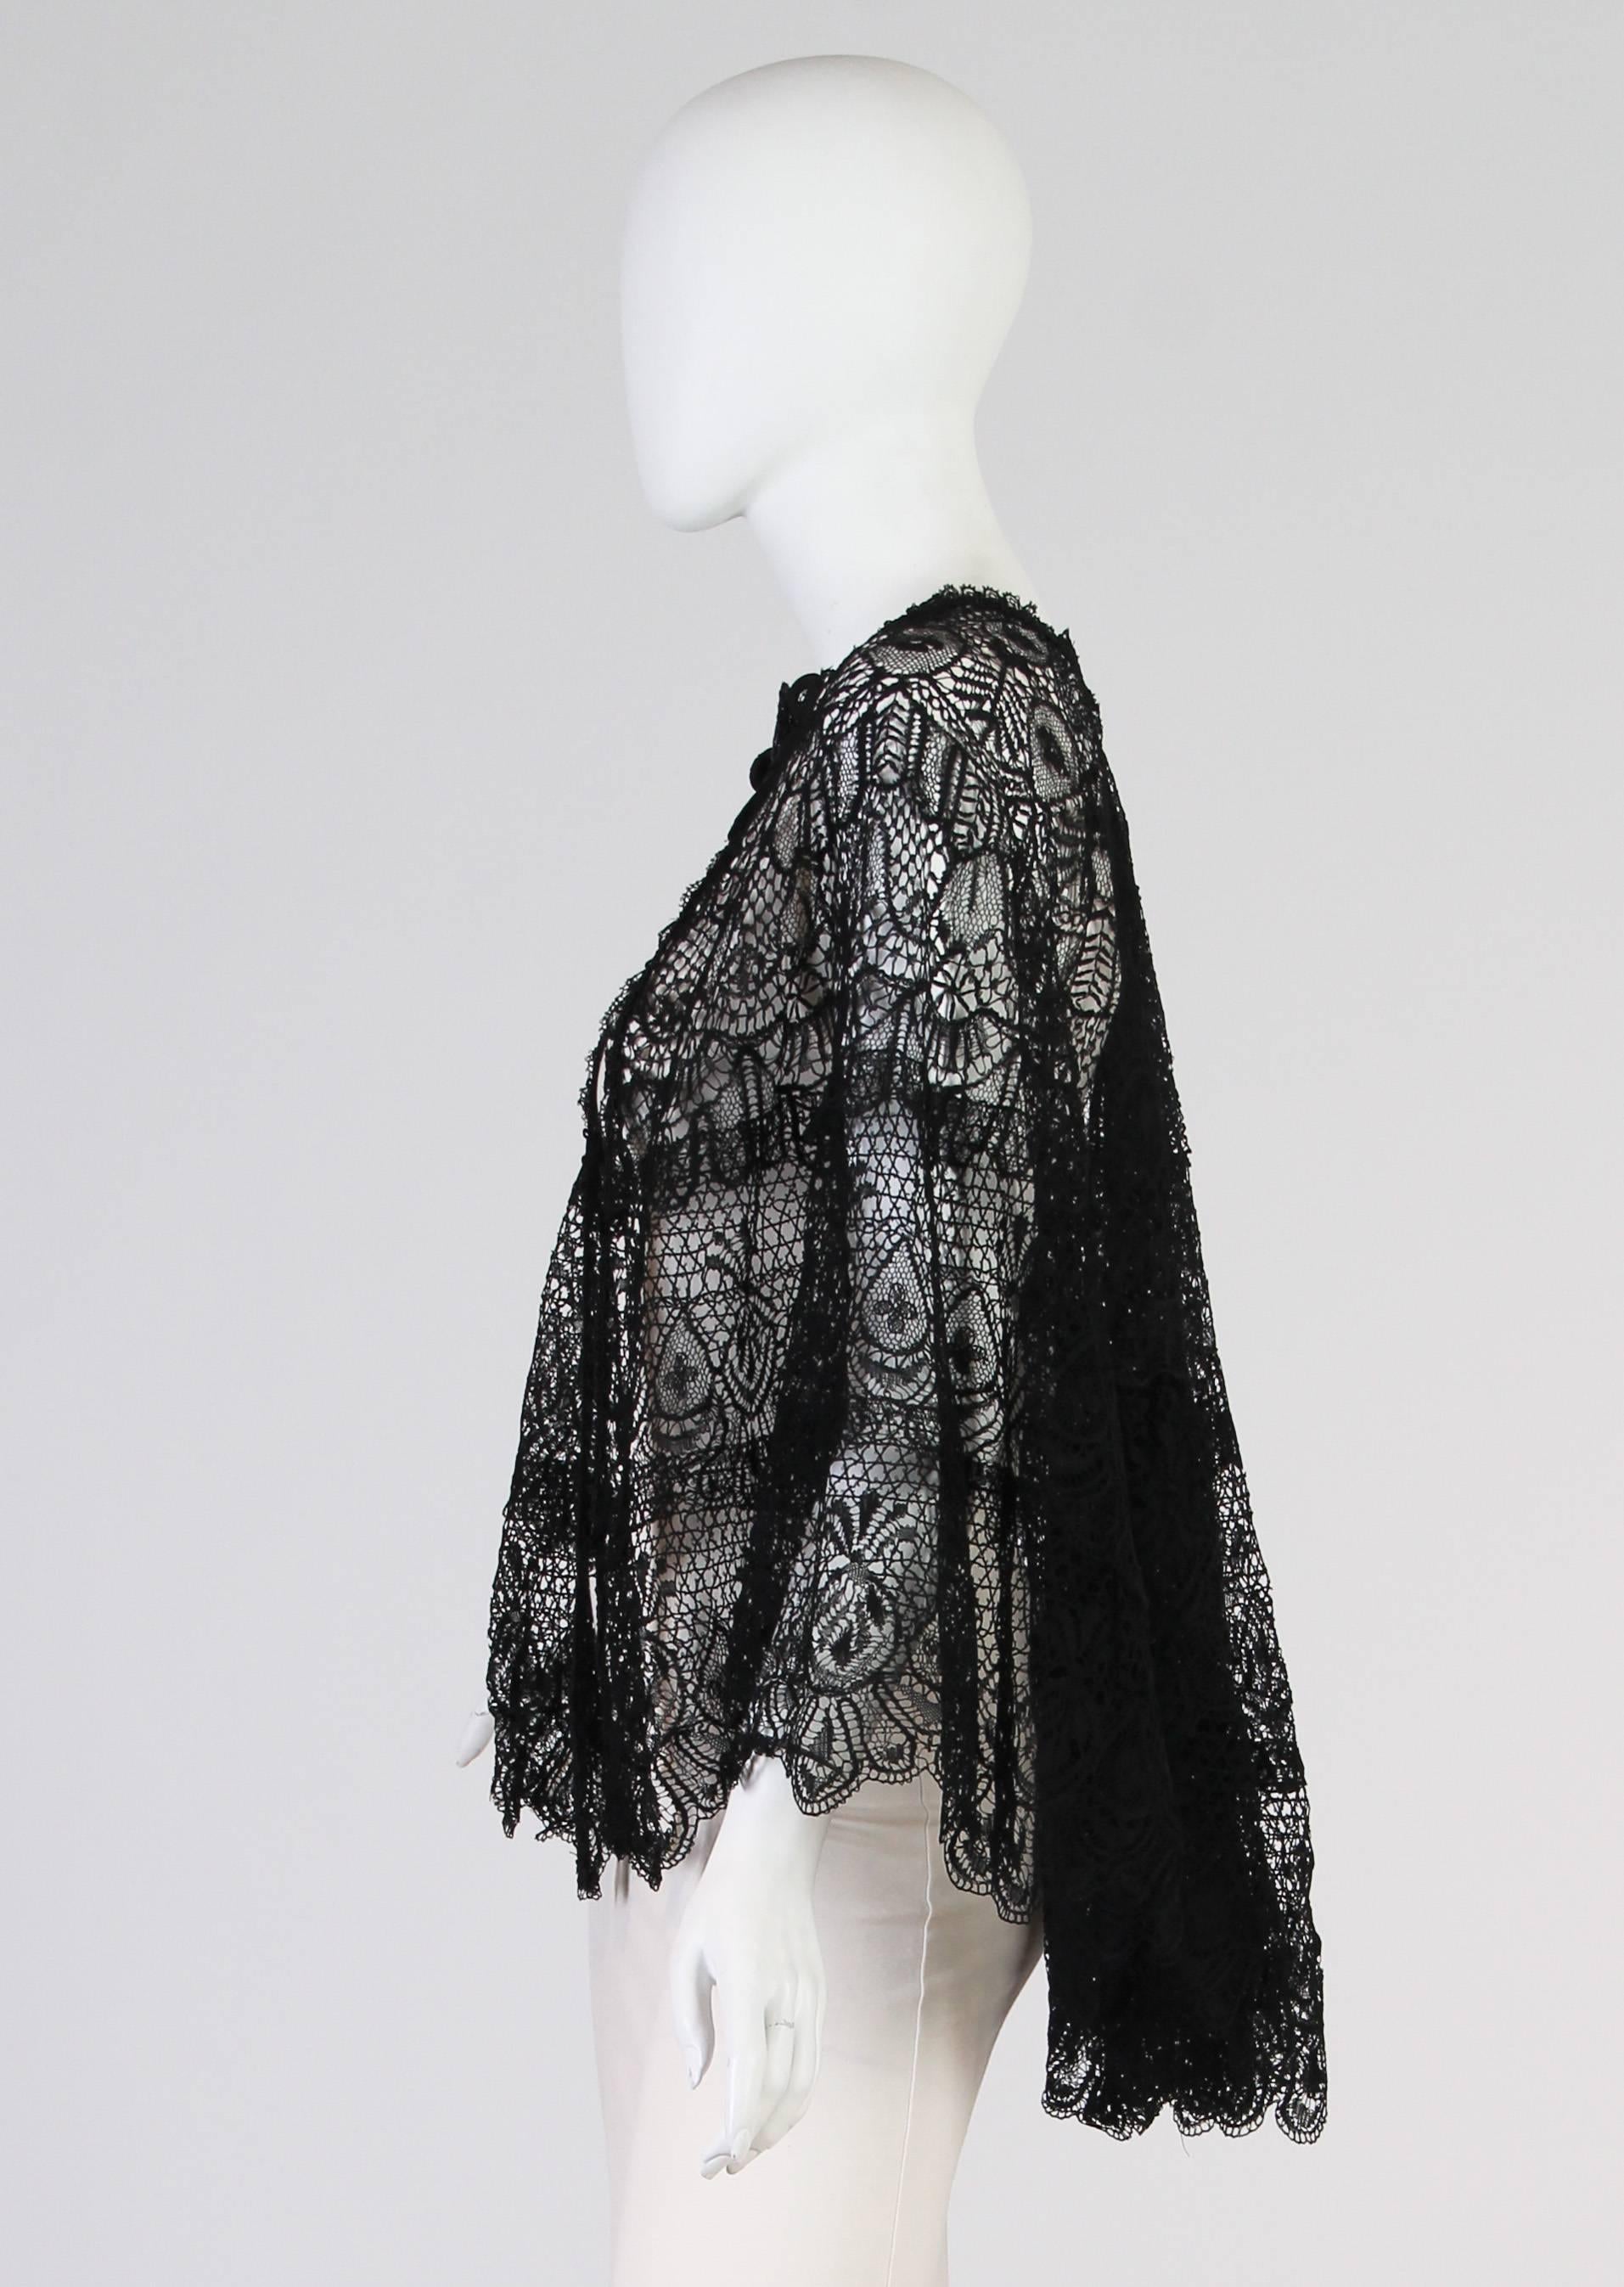 Victorian French Lace Cape purchased in Paris. 